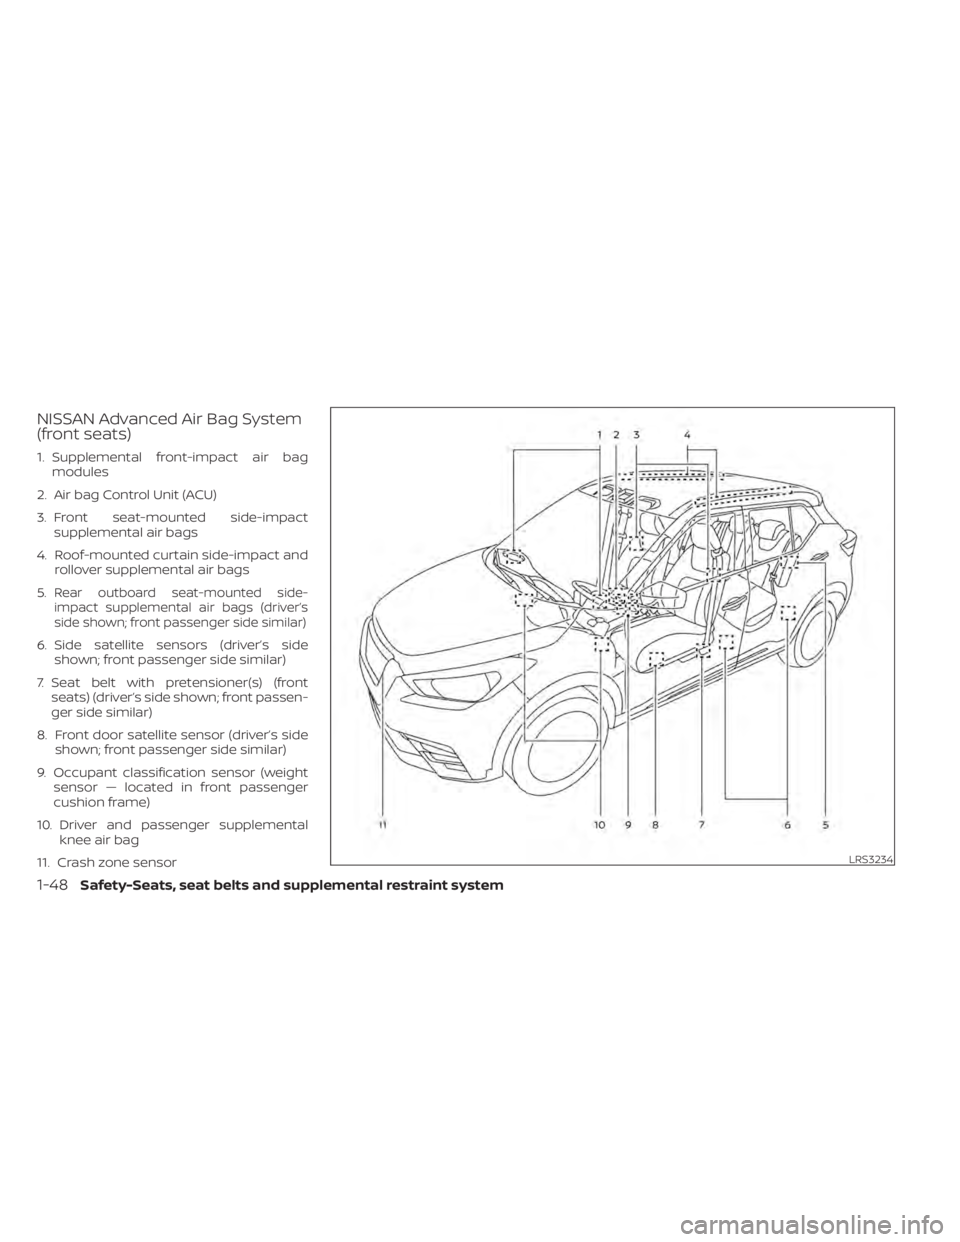 NISSAN KICKS 2021  Owners Manual NISSAN Advanced Air Bag System
(front seats)
1. Supplemental front-impact air bagmodules
2. Air bag Control Unit (ACU)
3. Front seat-mounted side-impact supplemental air bags
4. Roof-mounted curtain s